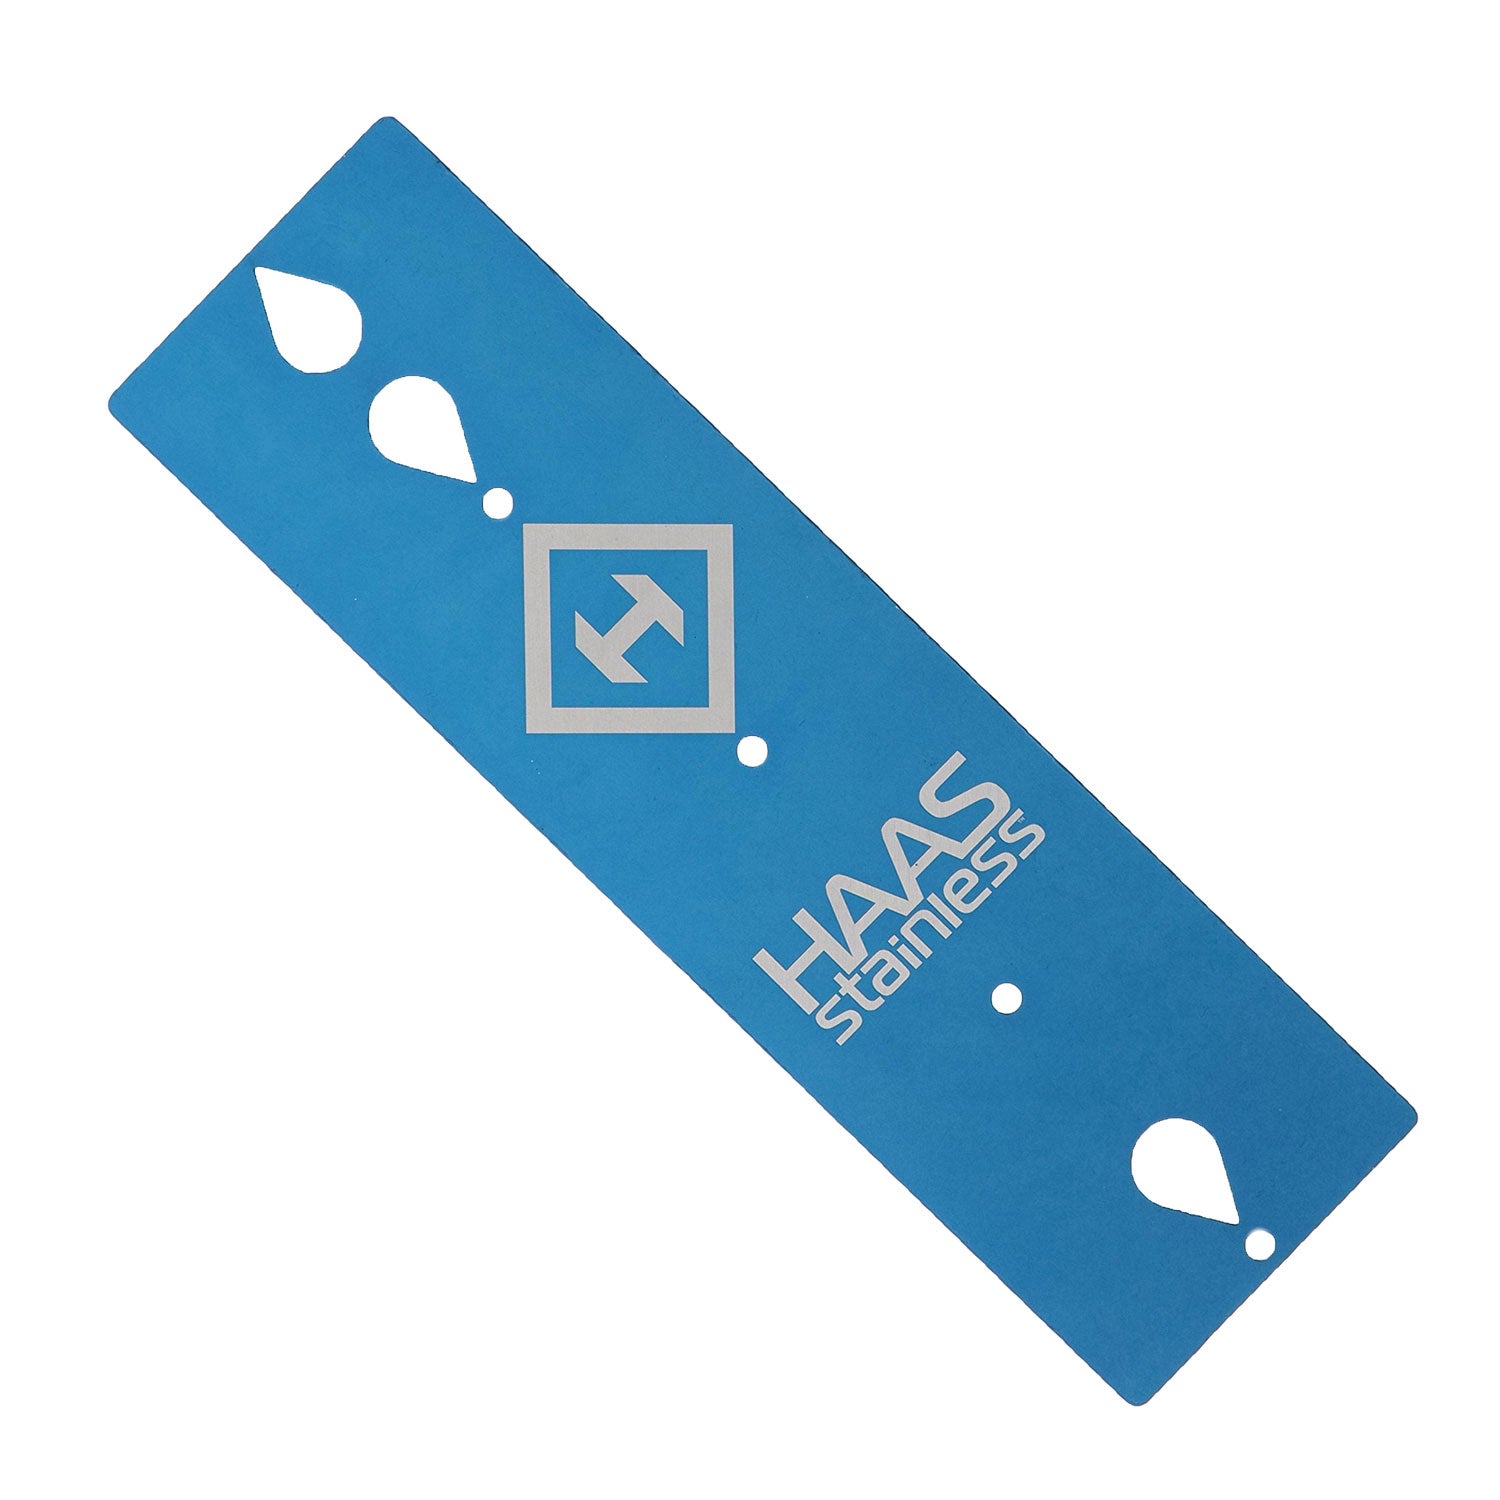 HAAS Cable Railing Marking Template